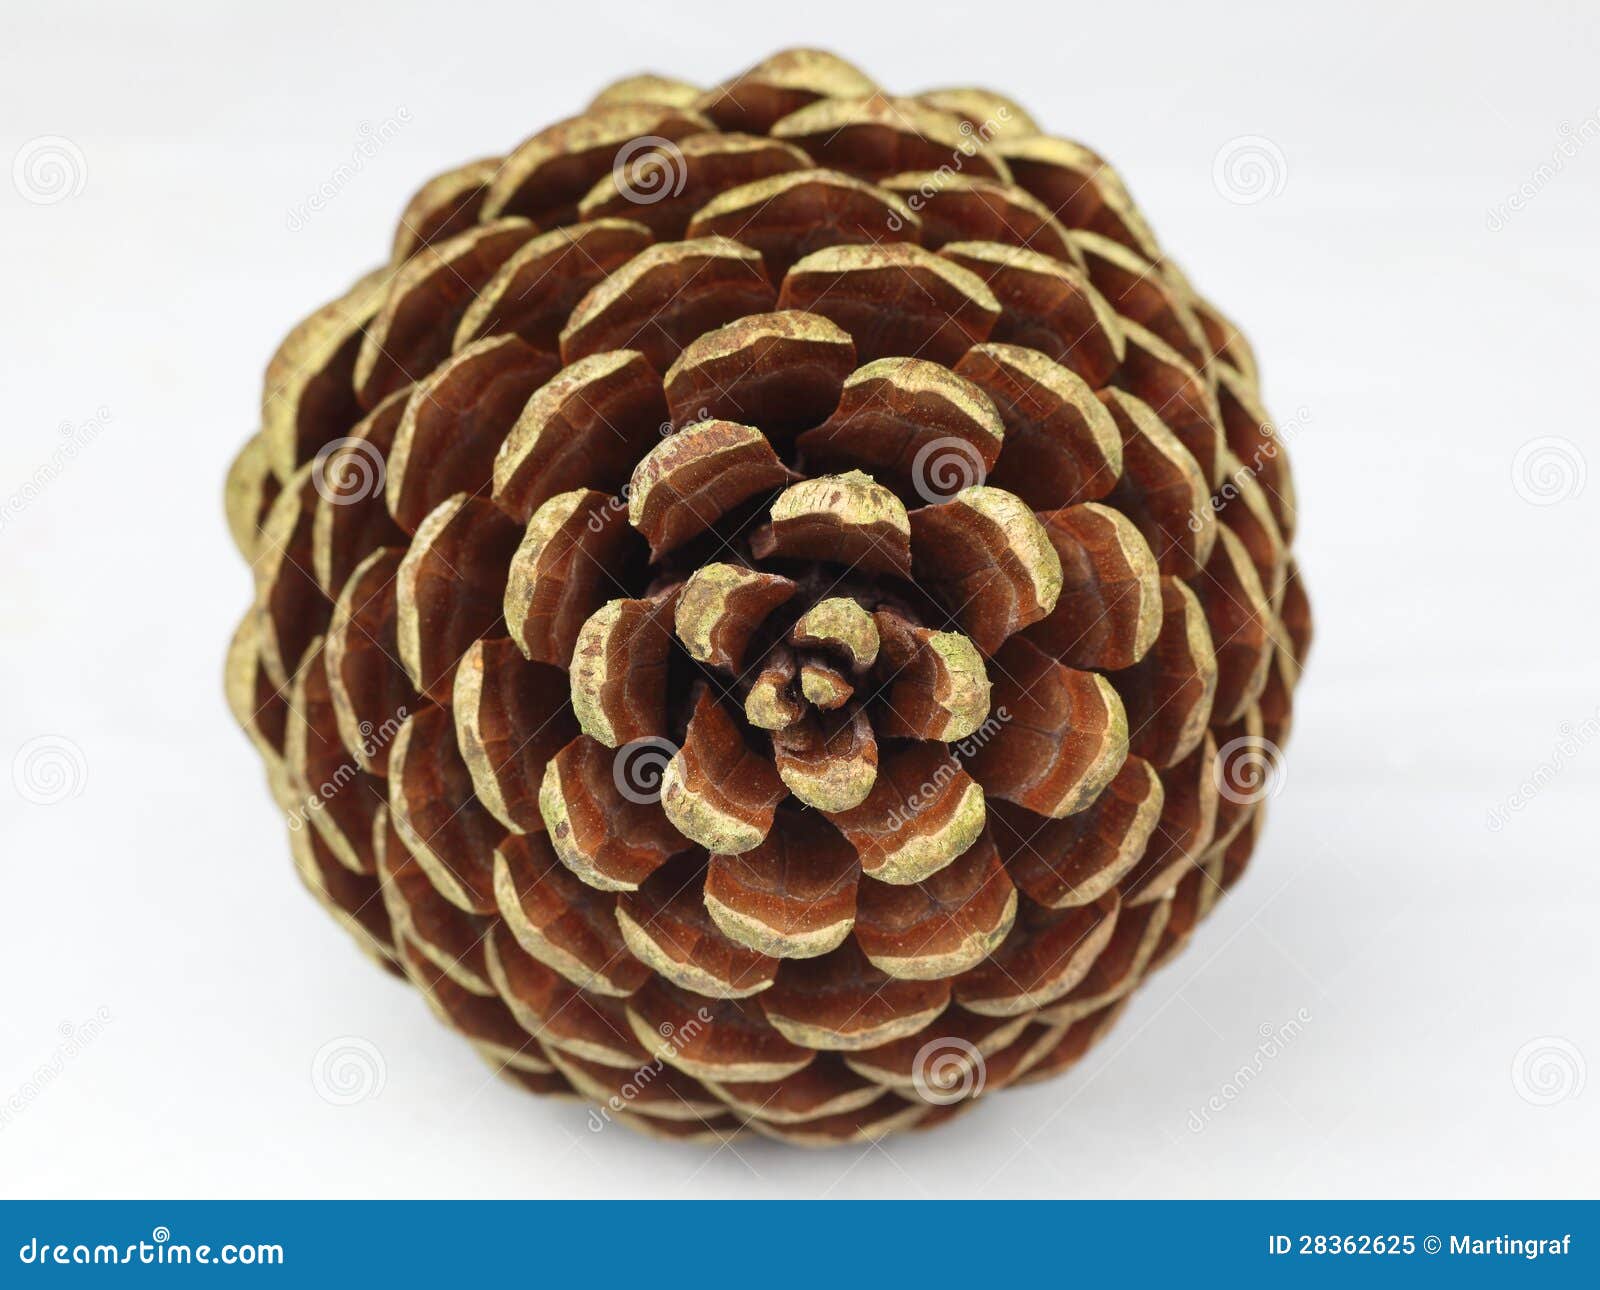 pine cone tip